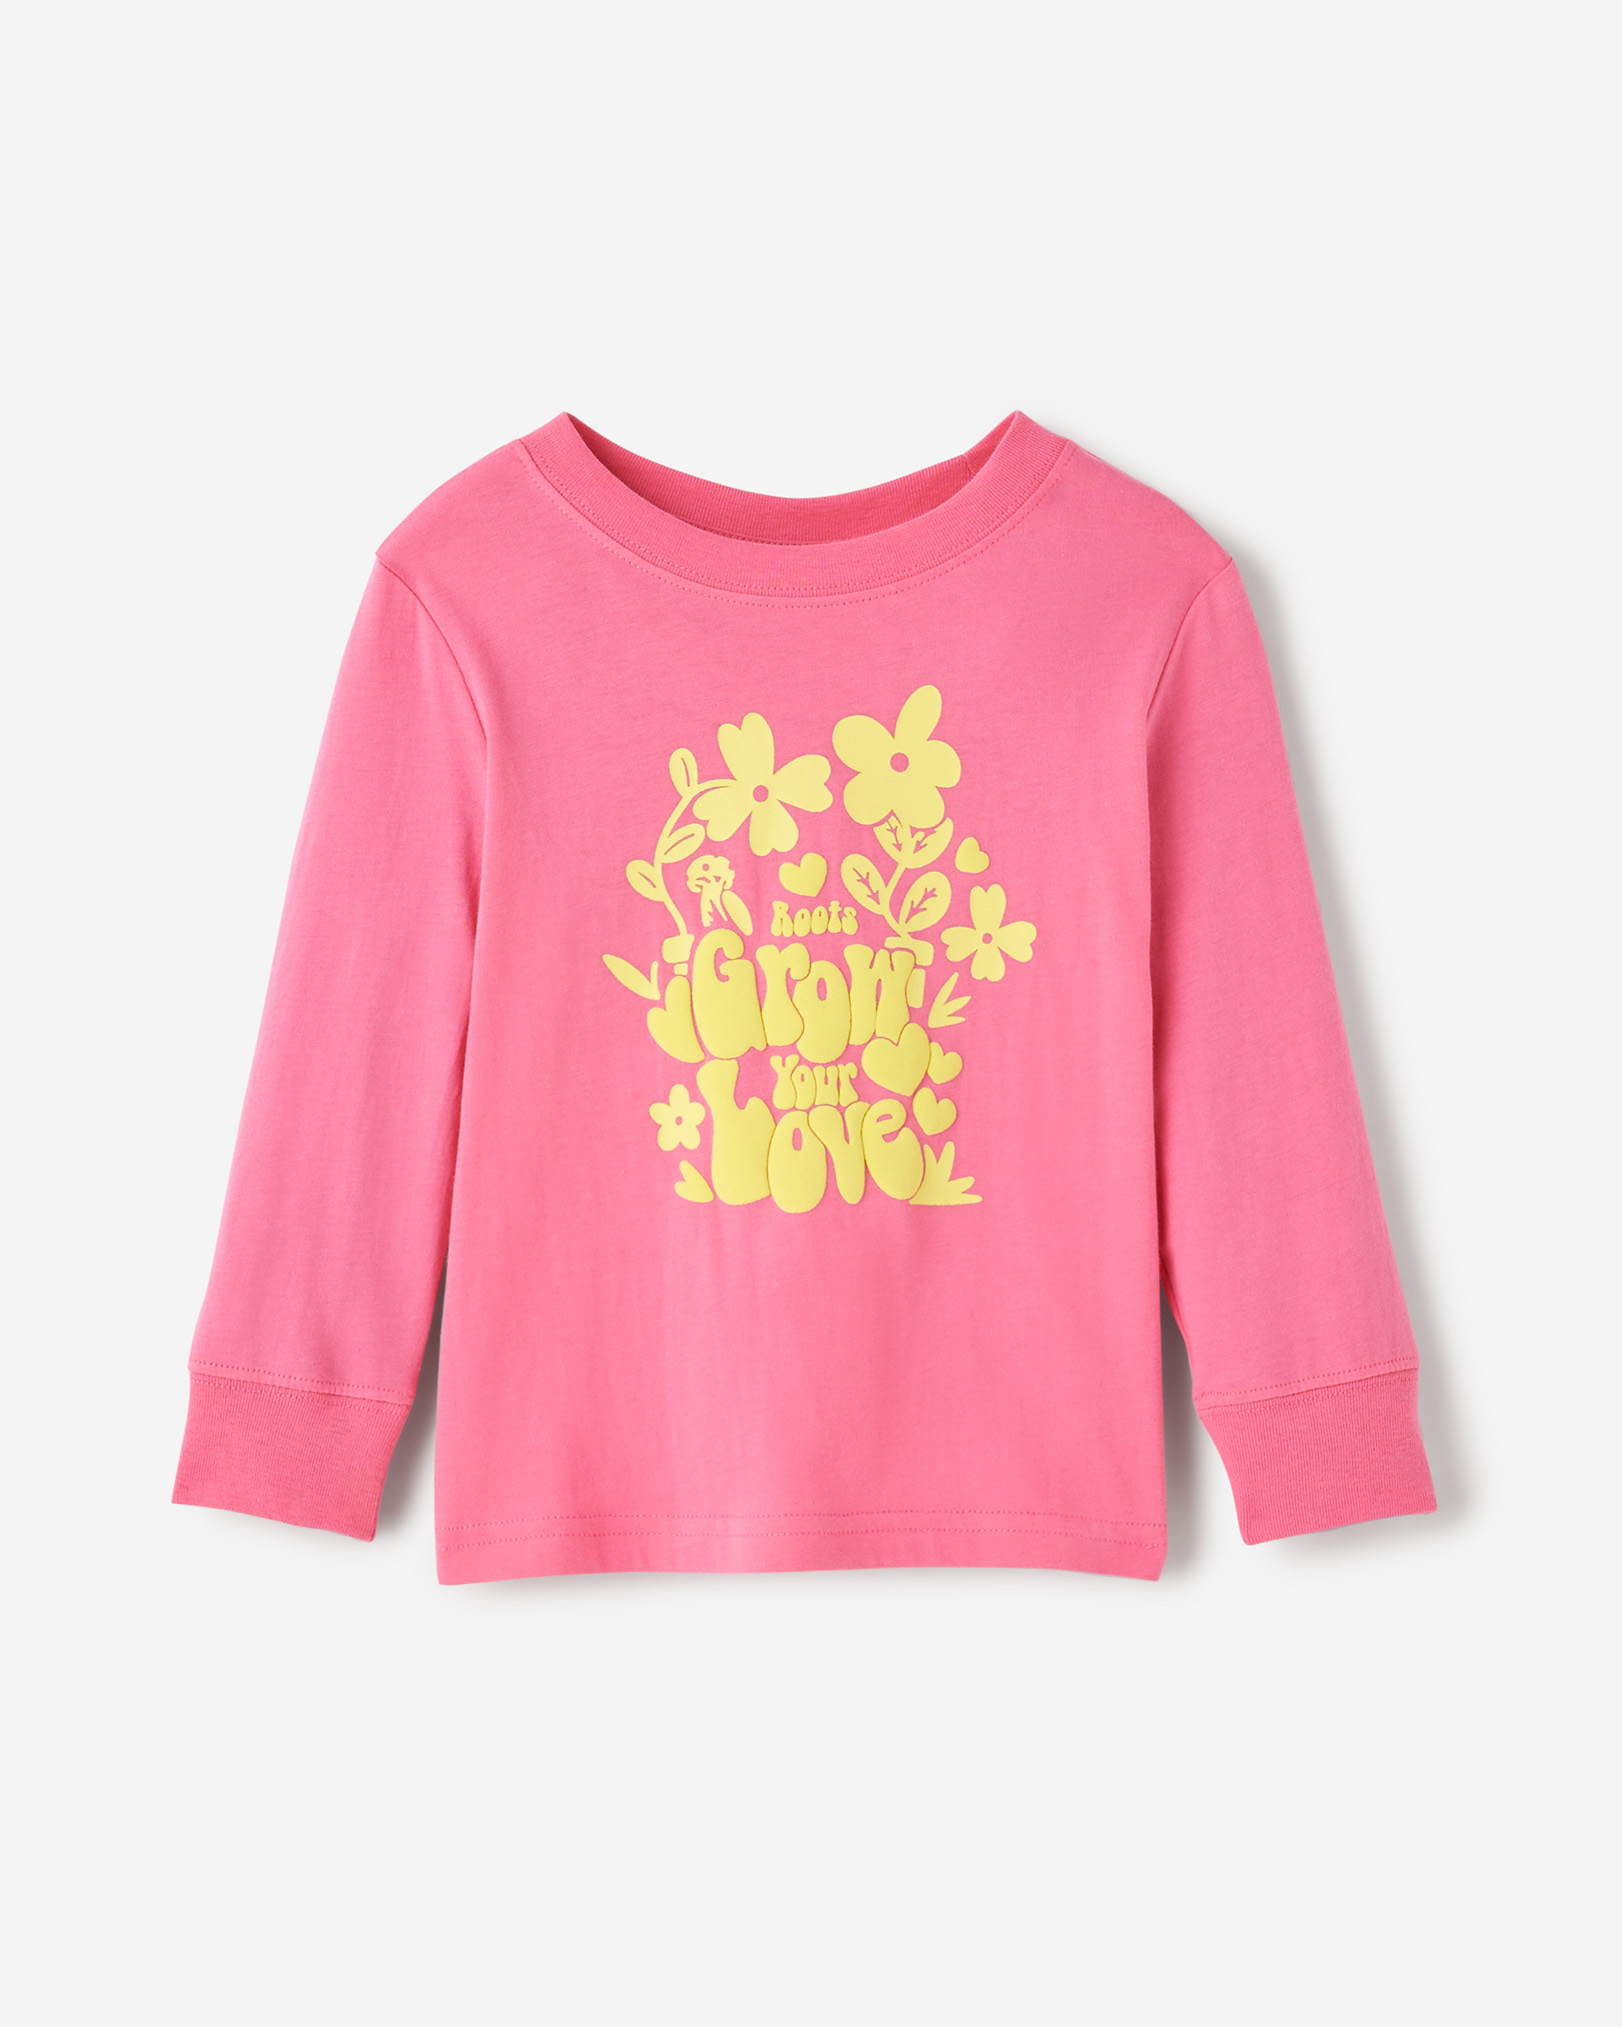 Roots Toddler Grow Your Love T-Shirt in Pink Raspberry